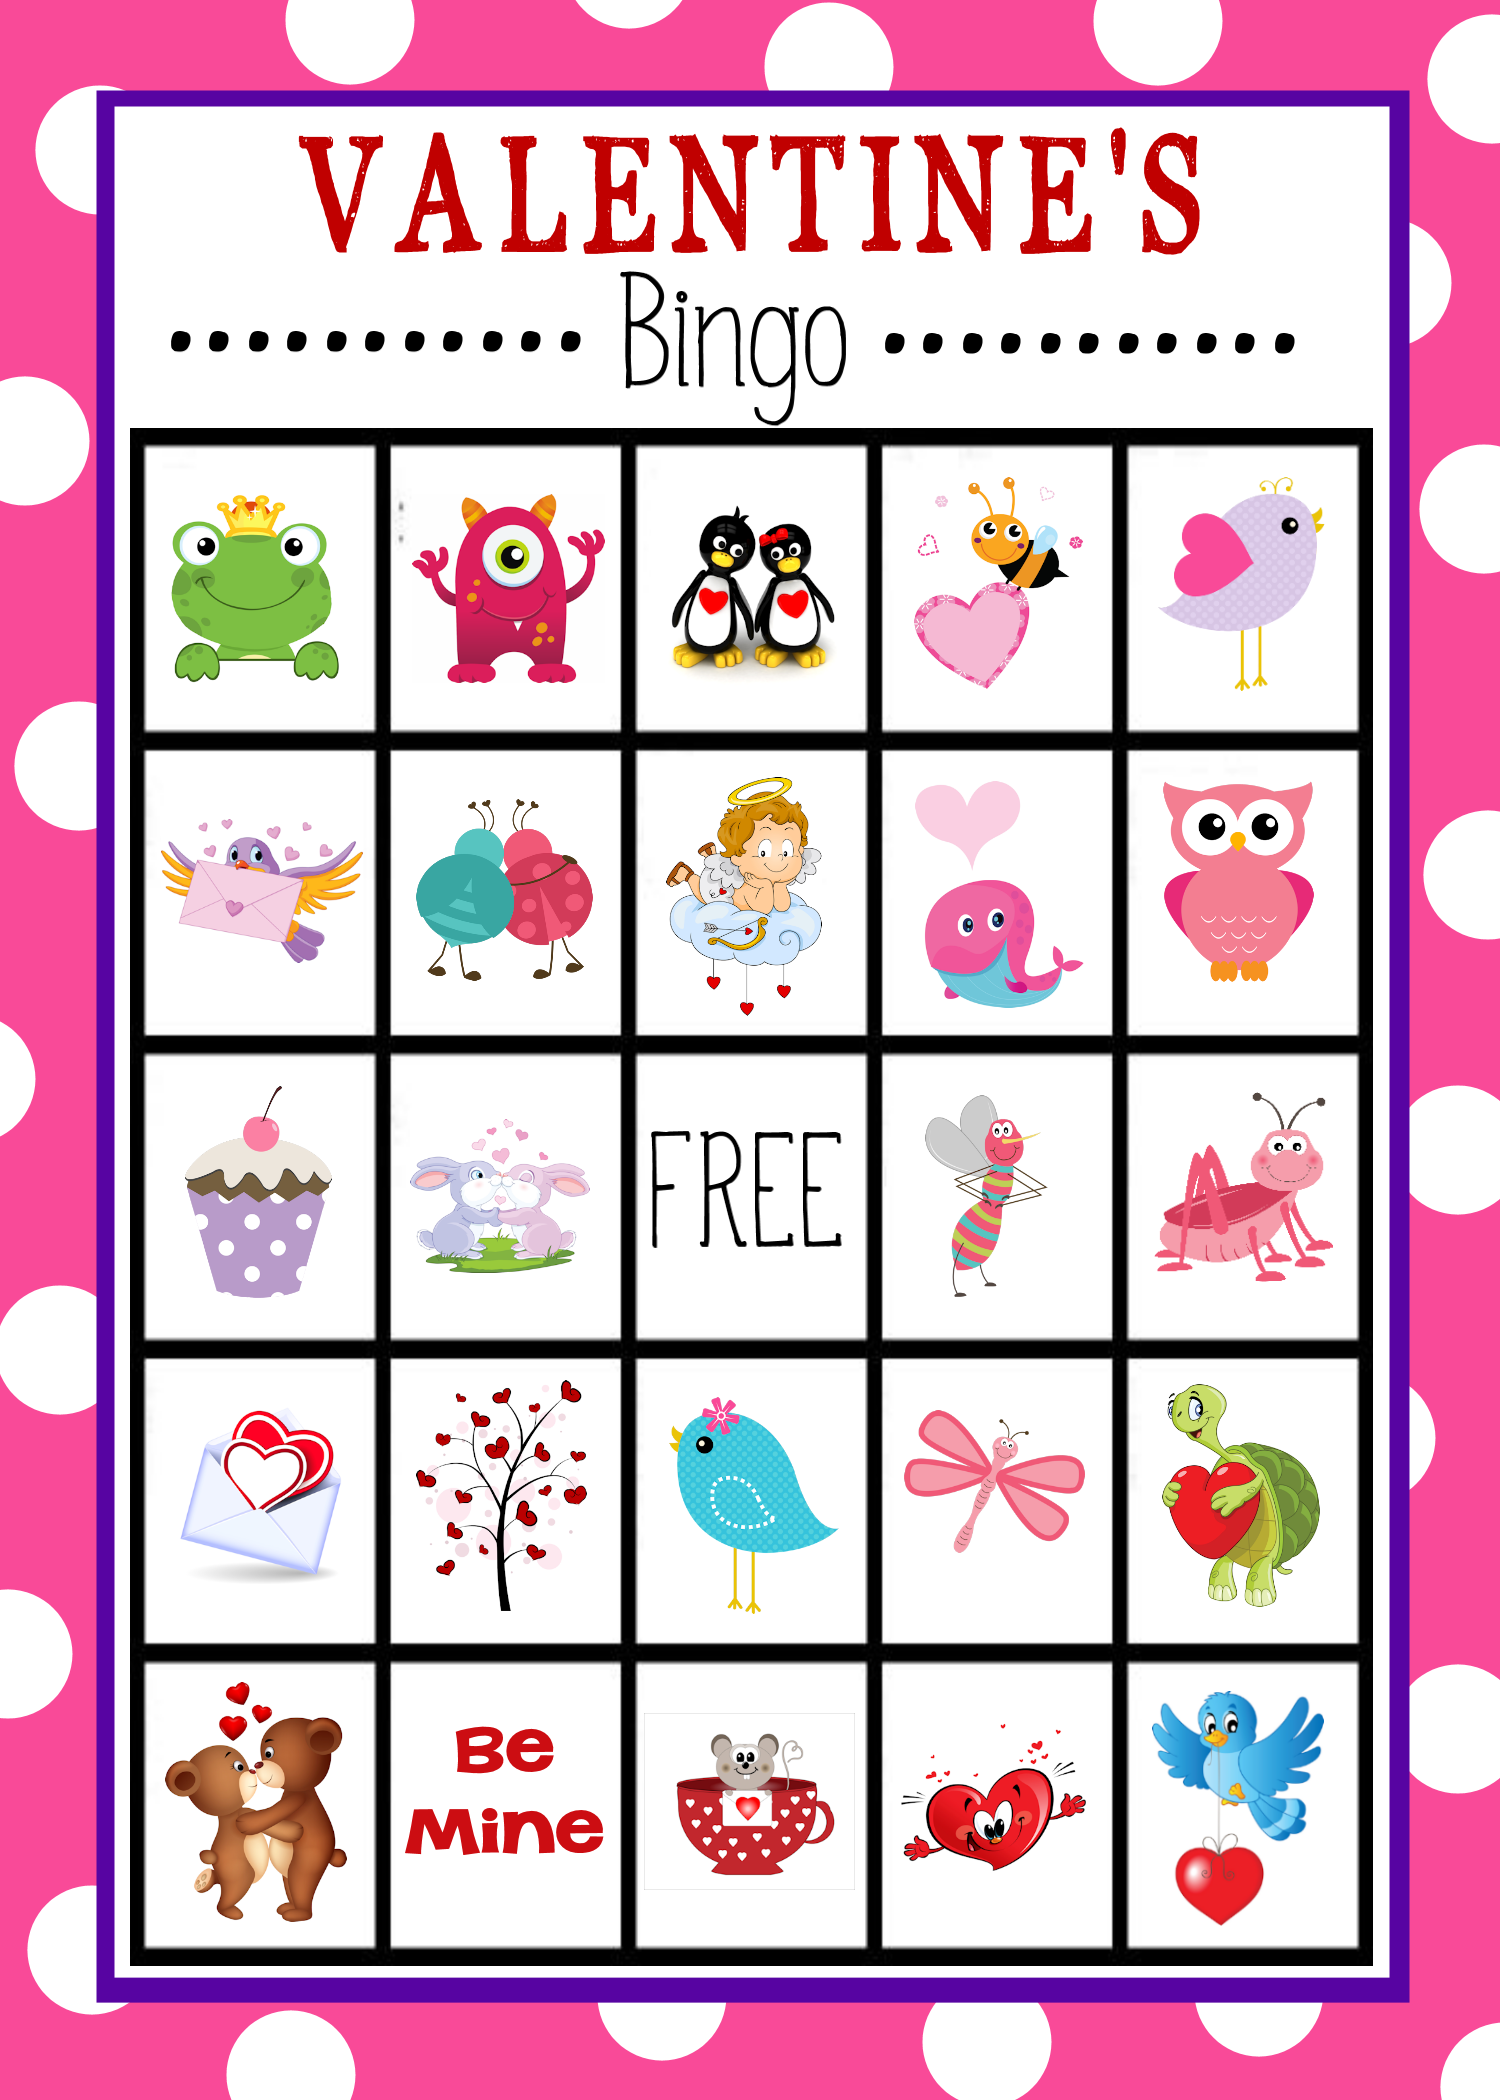 Game Printable Images Gallery Category Page 27 - printablee.com